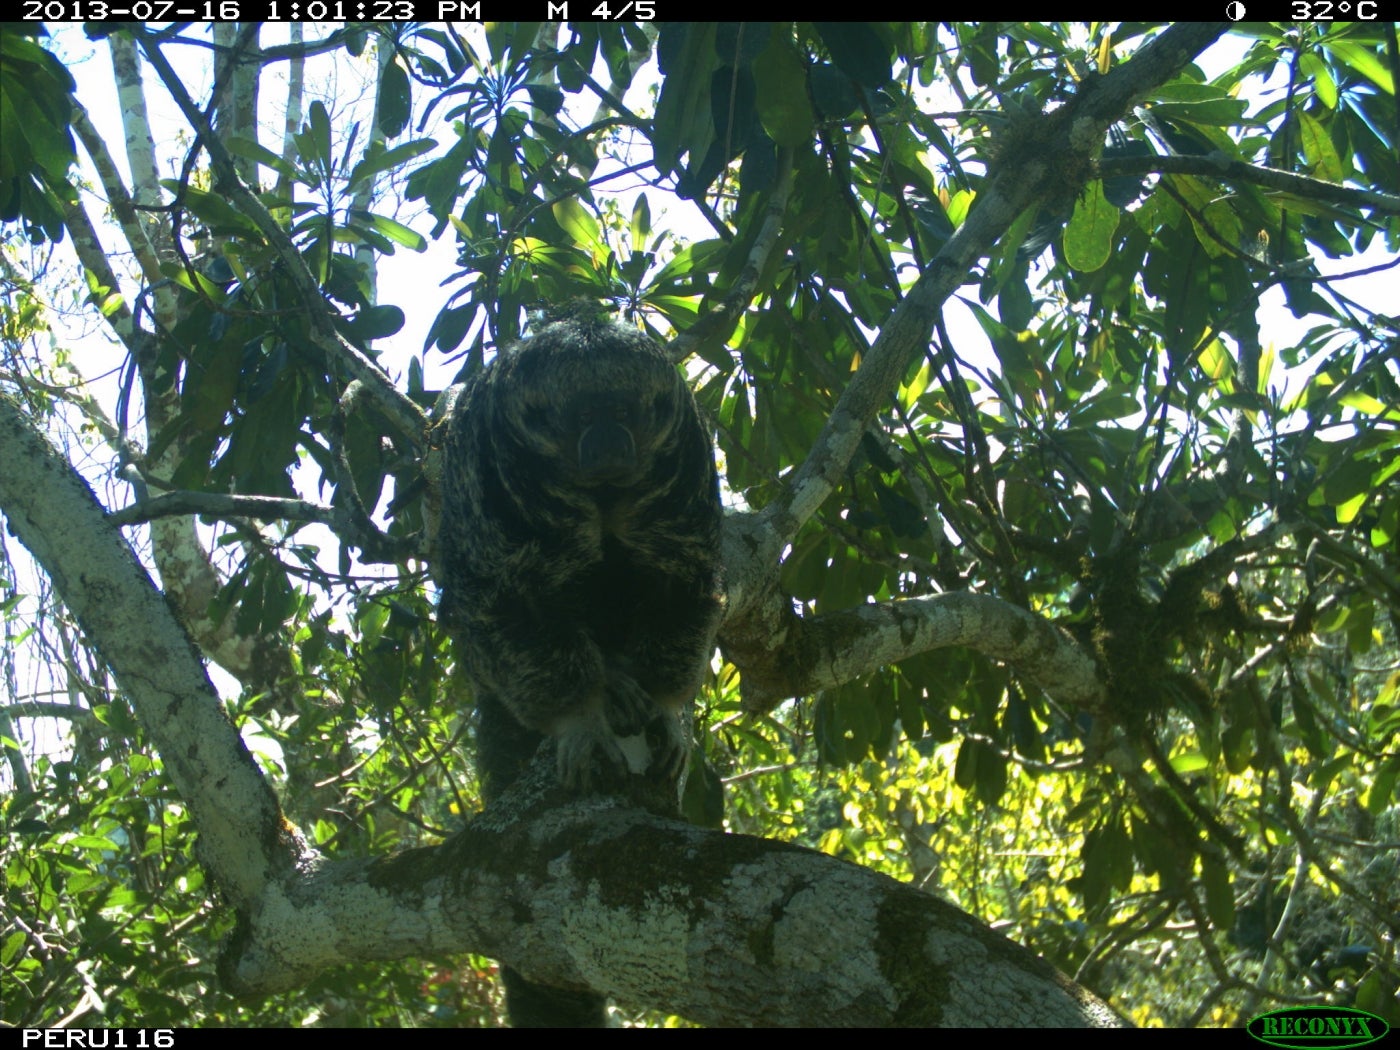 A camera trap photo of a saki monkey sitting on a branch high up in the trees of Peru's tropical forest.